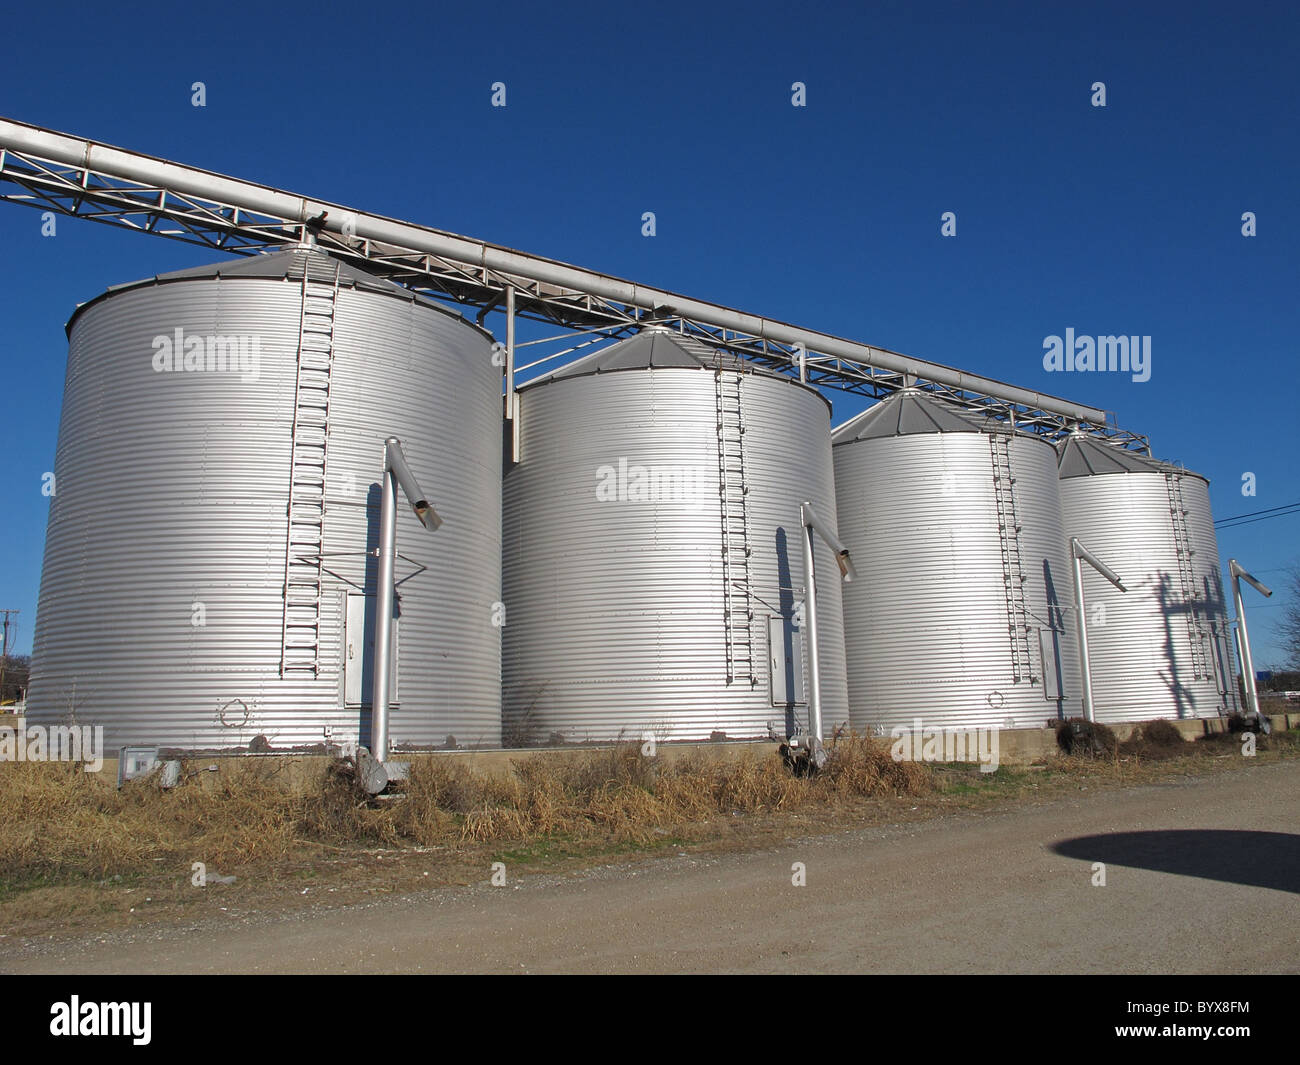 Four silver grain silos in the country Stock Photo